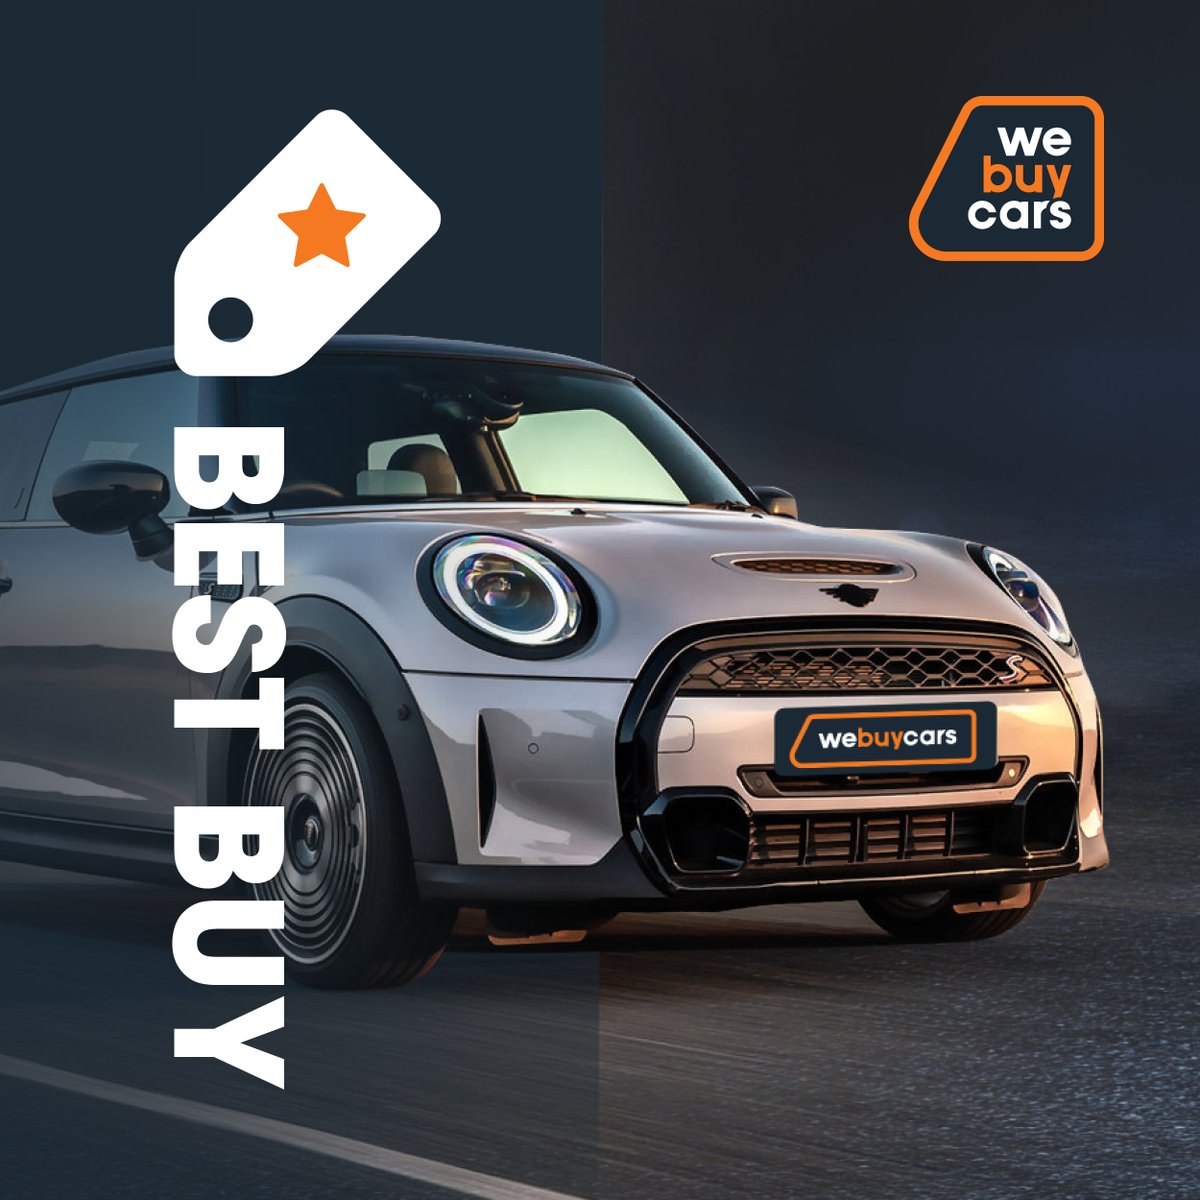 Curious about the #WeBuyCars Best Buy Tags? These labels highlight vehicles offering unbeatable value, with competitive prices, these are the best vehicles to buy in the market. Keep an eye out for these tags if you're on the hunt for a great deal 🙌 #carsforsale #carlifestyle